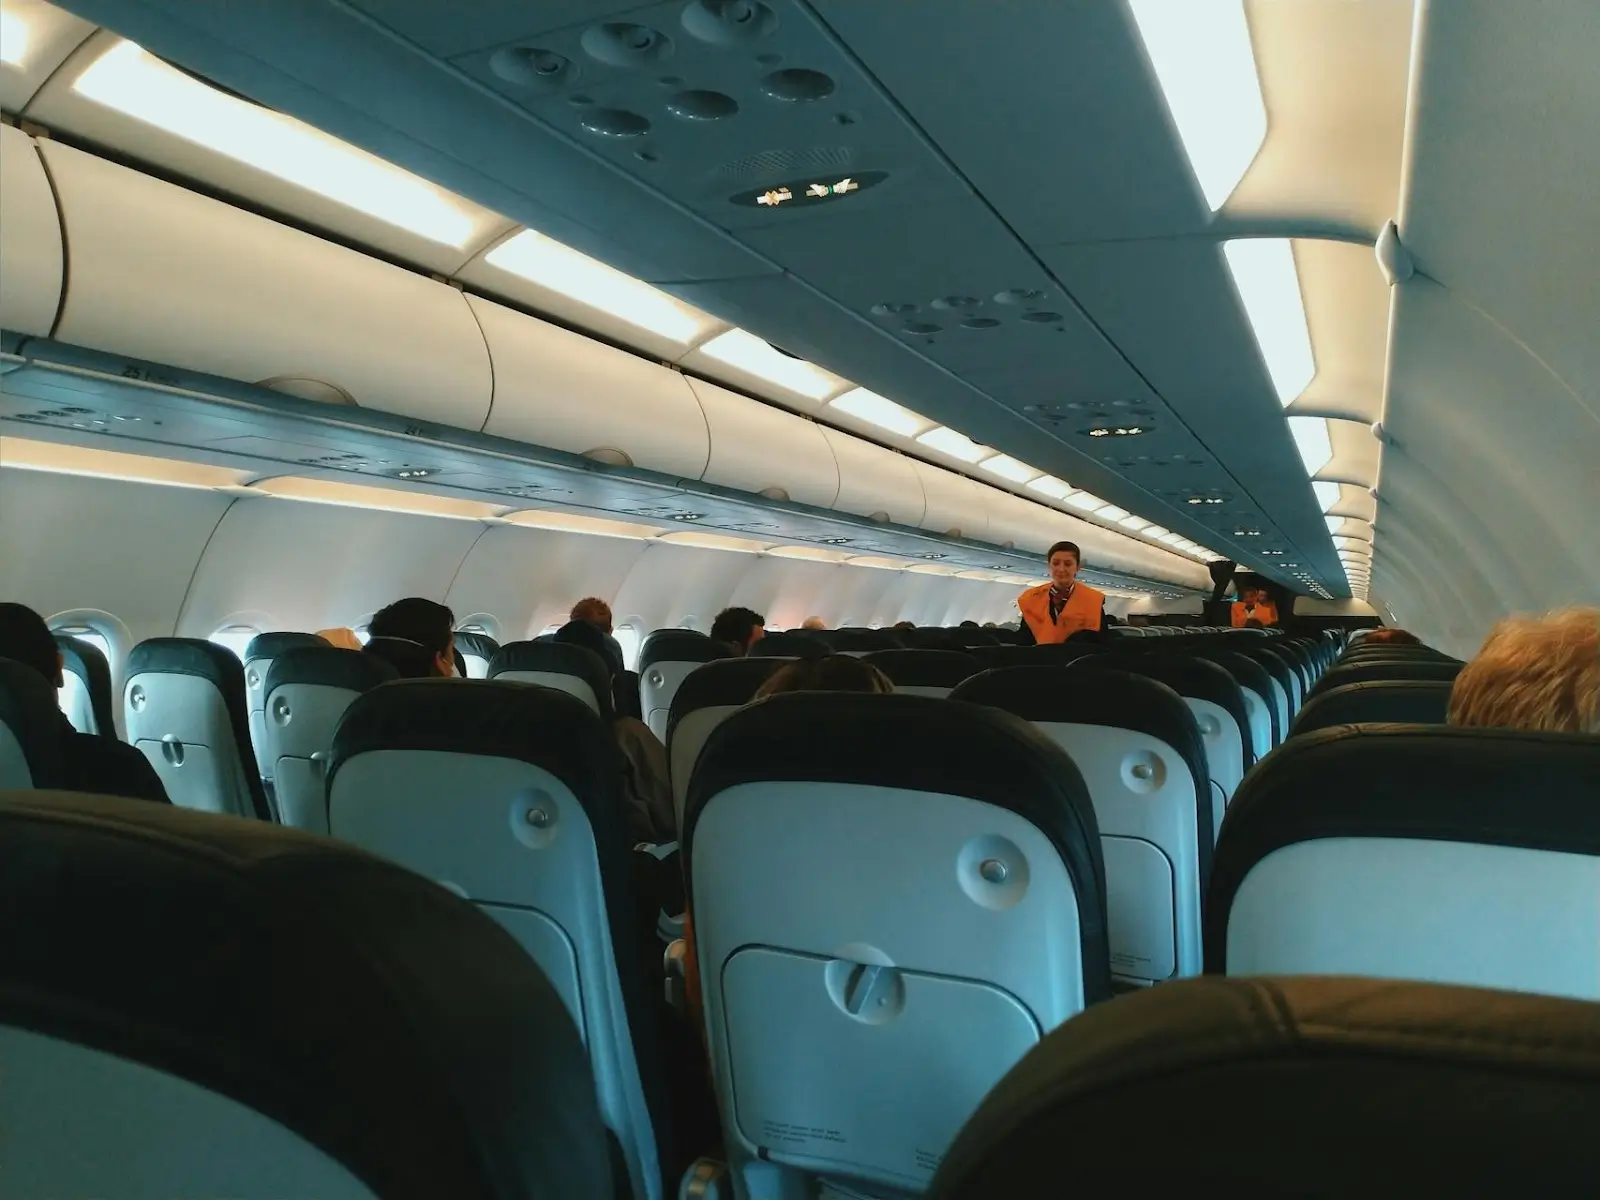 United aircraft cabin with passengers